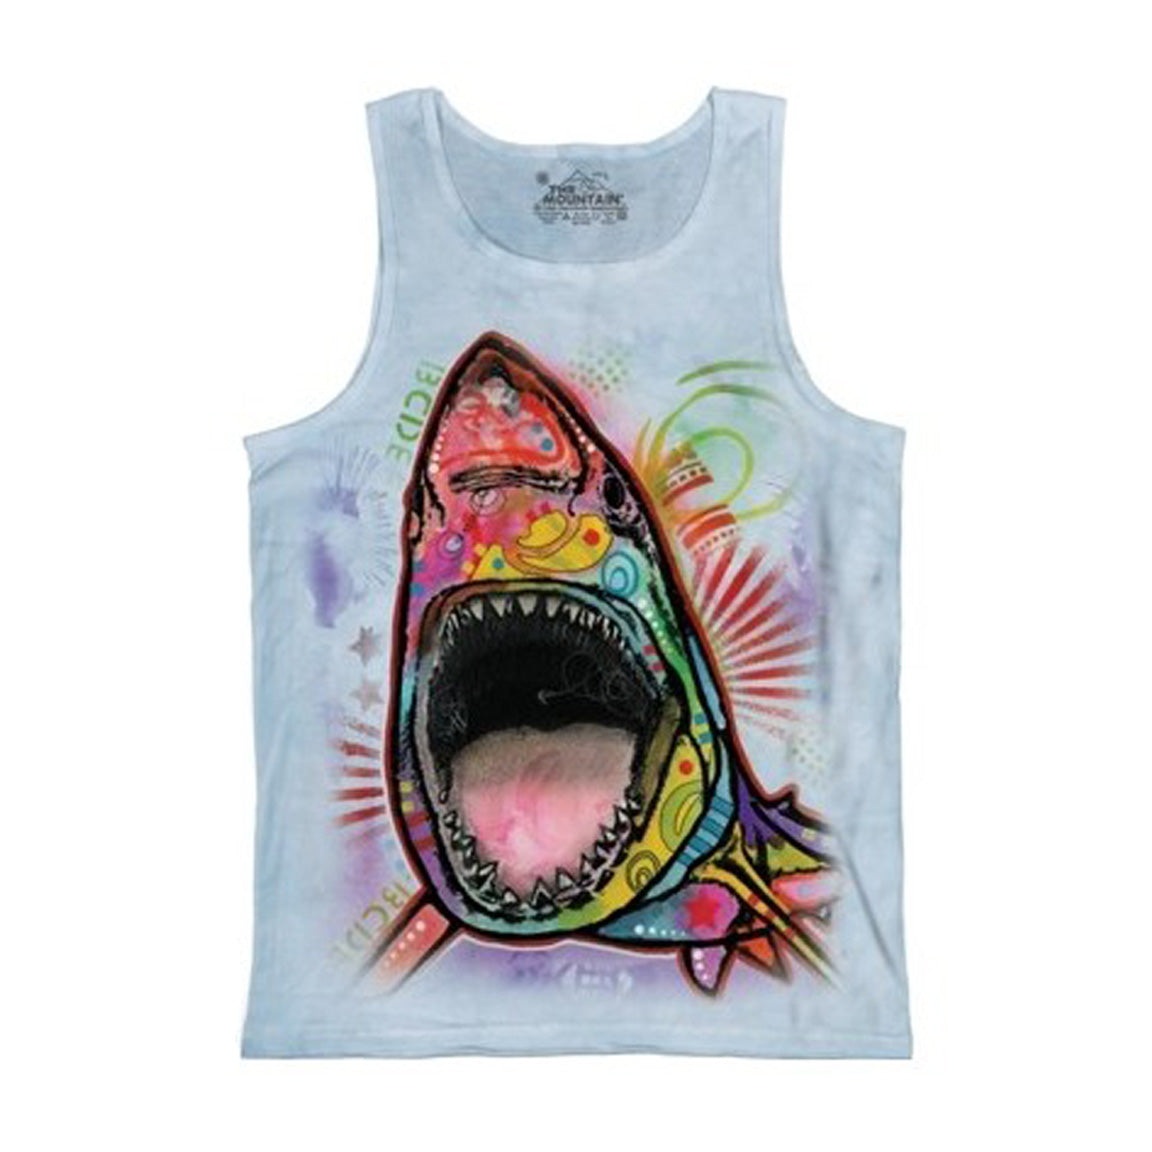 The Mountain - Russo Shark - Adult Unisex Tank Top